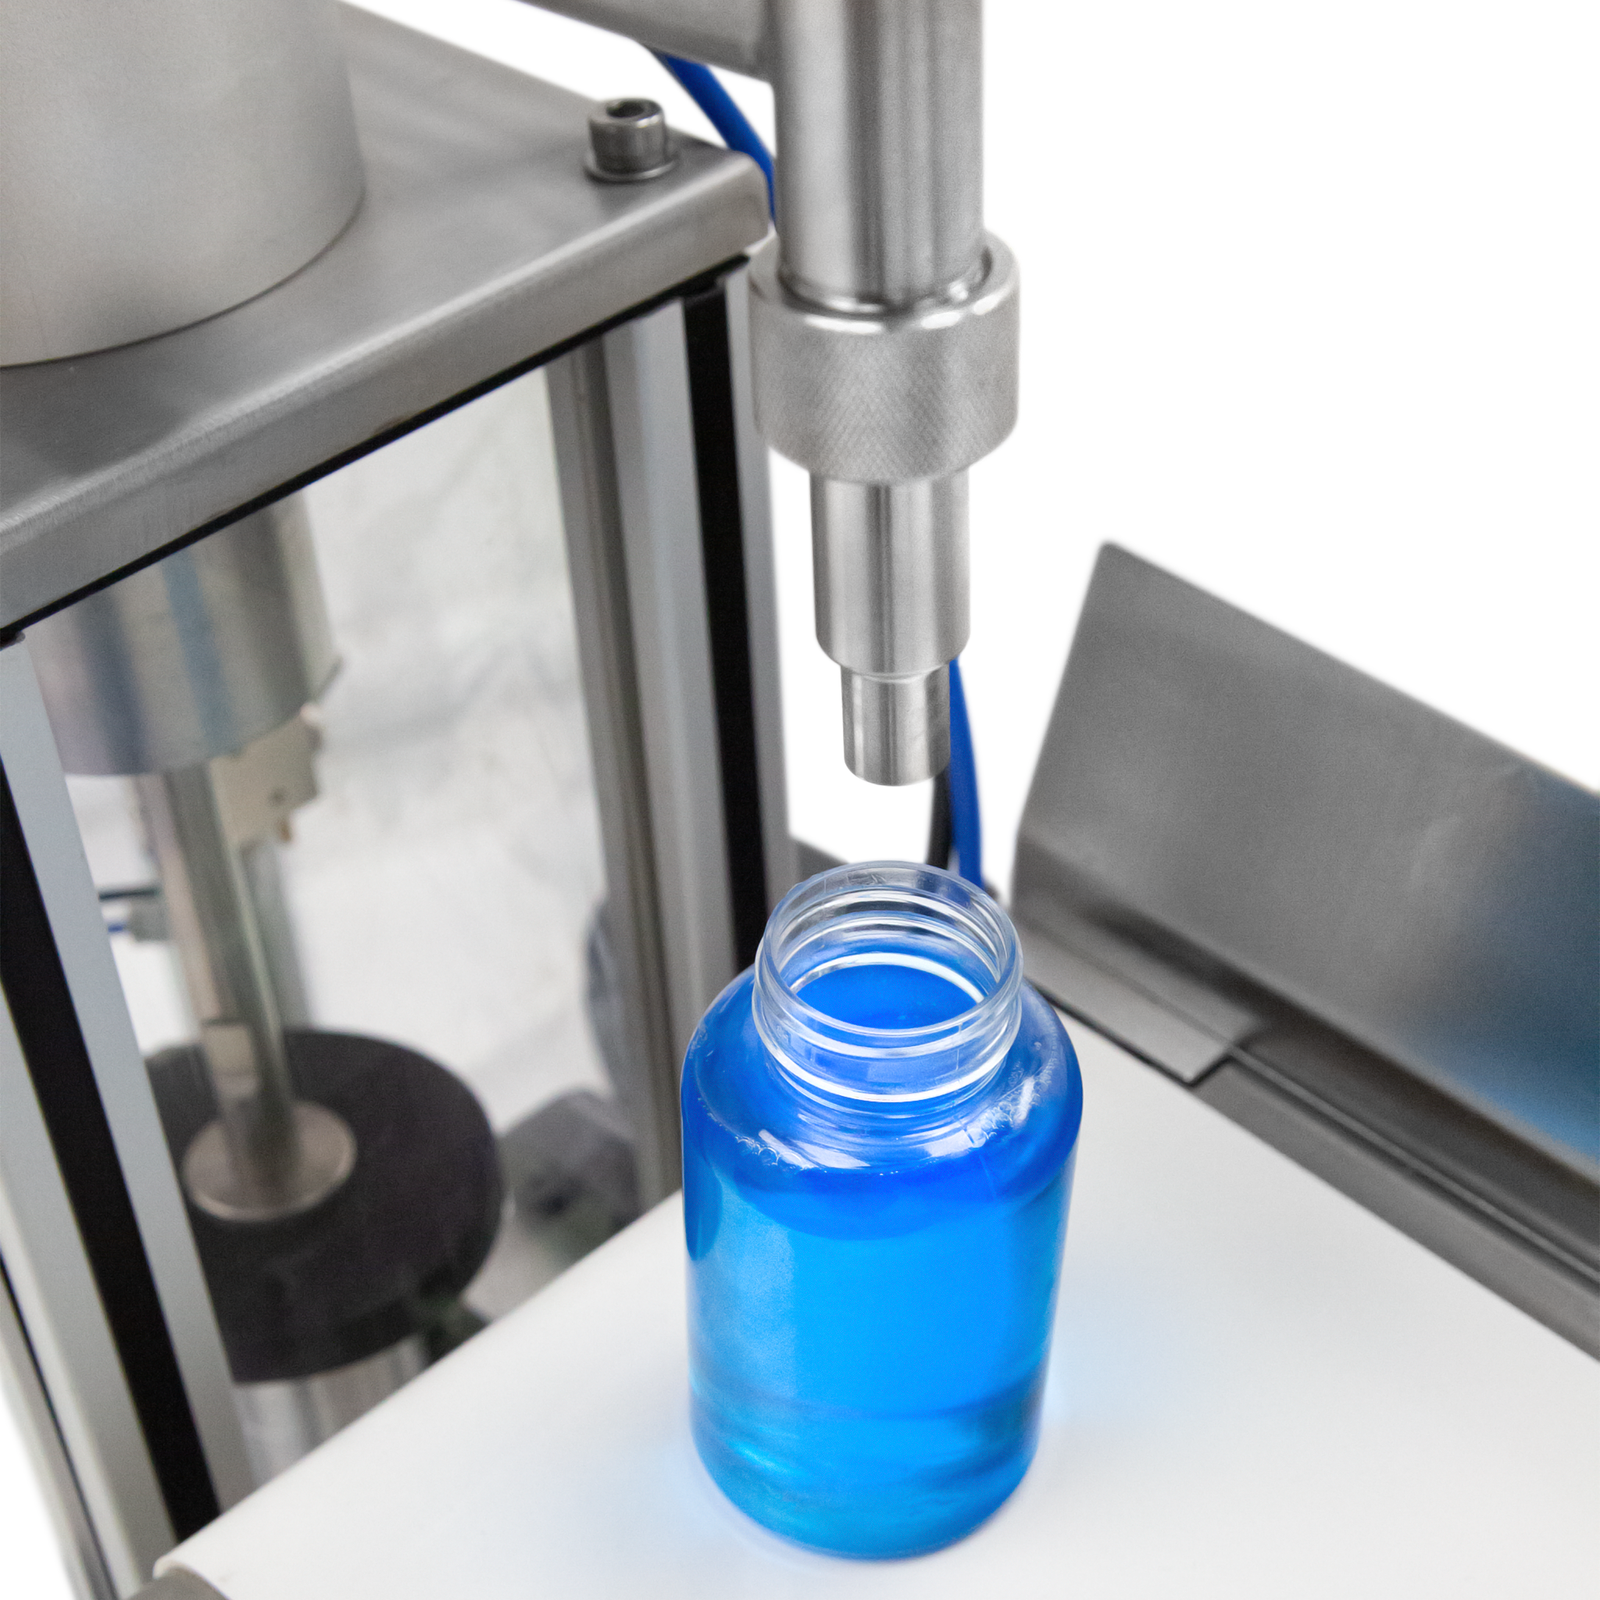 Closeup shows the stainless steel non-drip nozzle over the clear bottle filled with blue high viscosity liquid